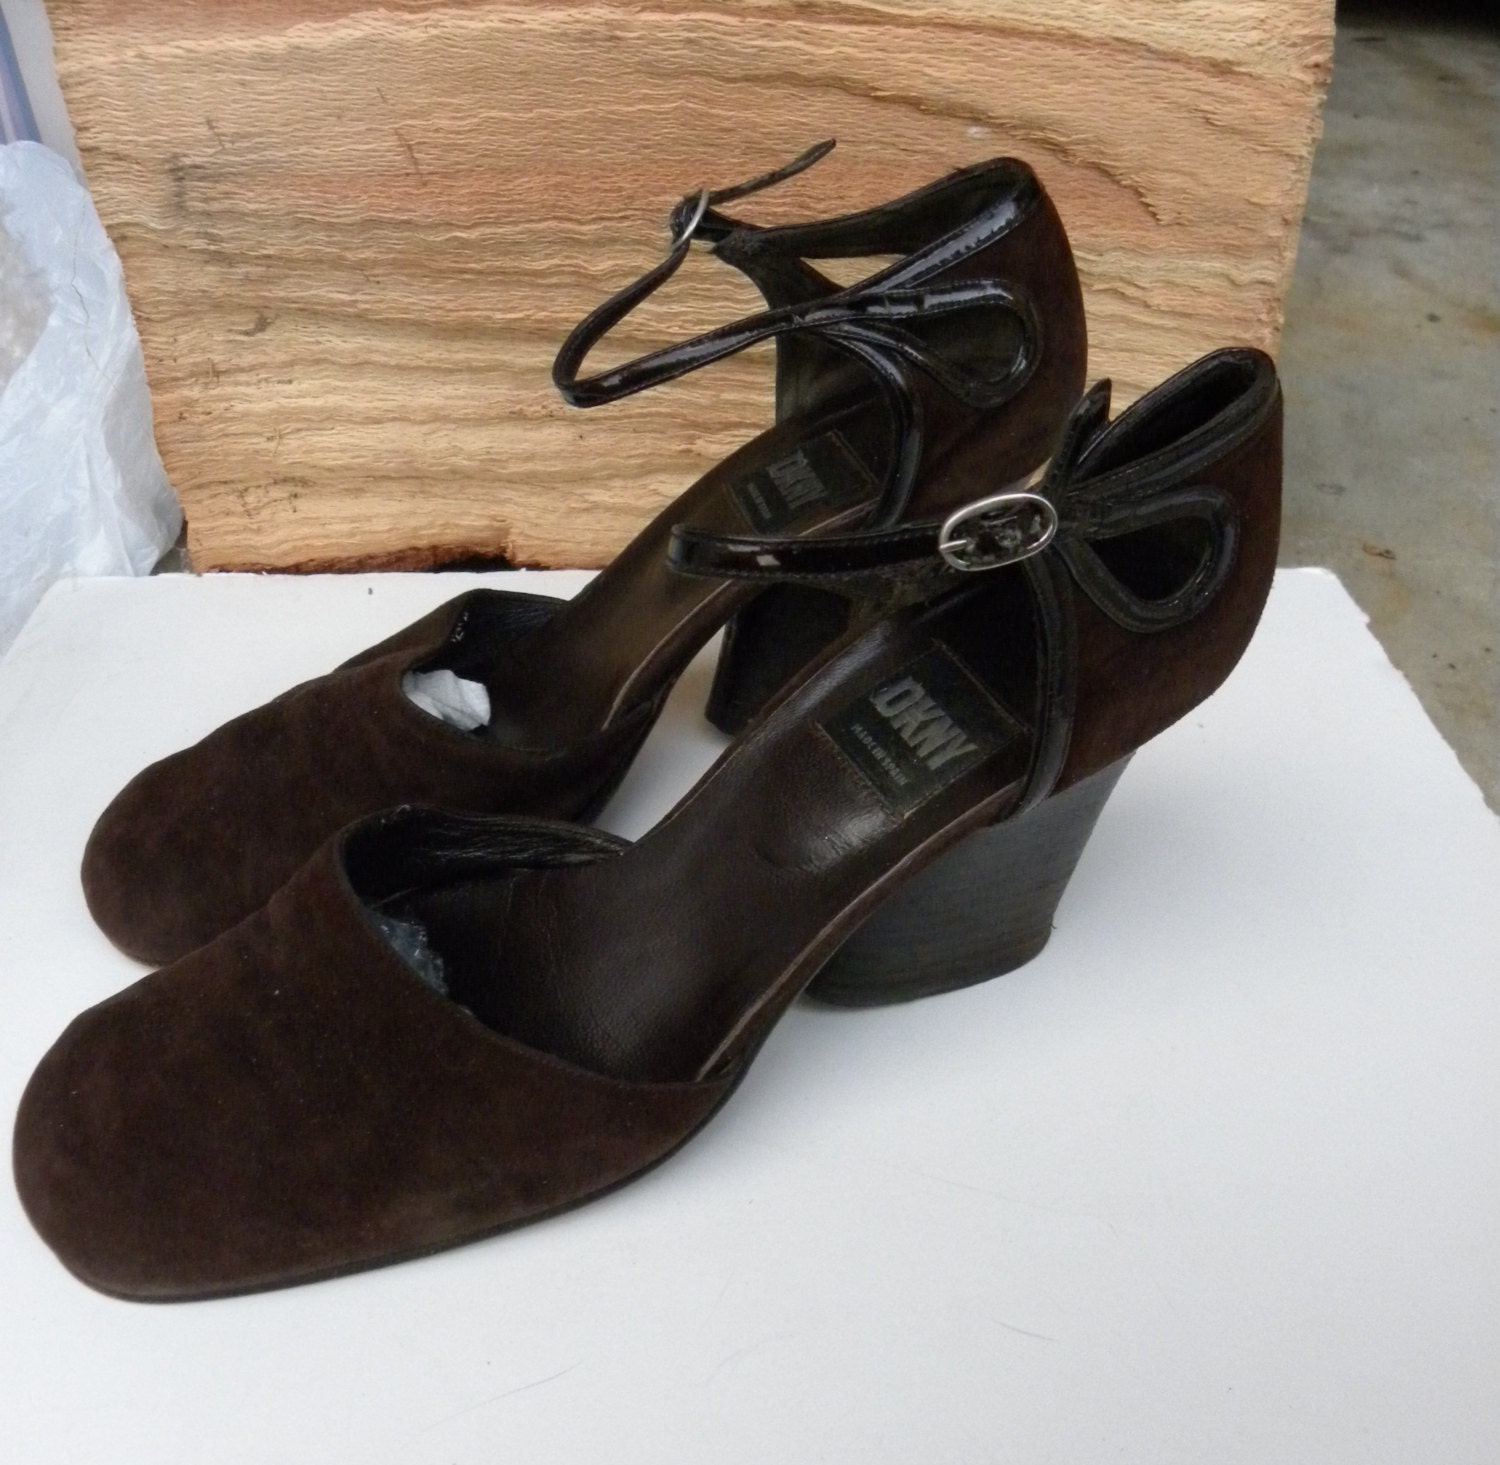  Vintage  Womens  DKNY Mary  Jane  Shoes  Brown Suede 9 Patent